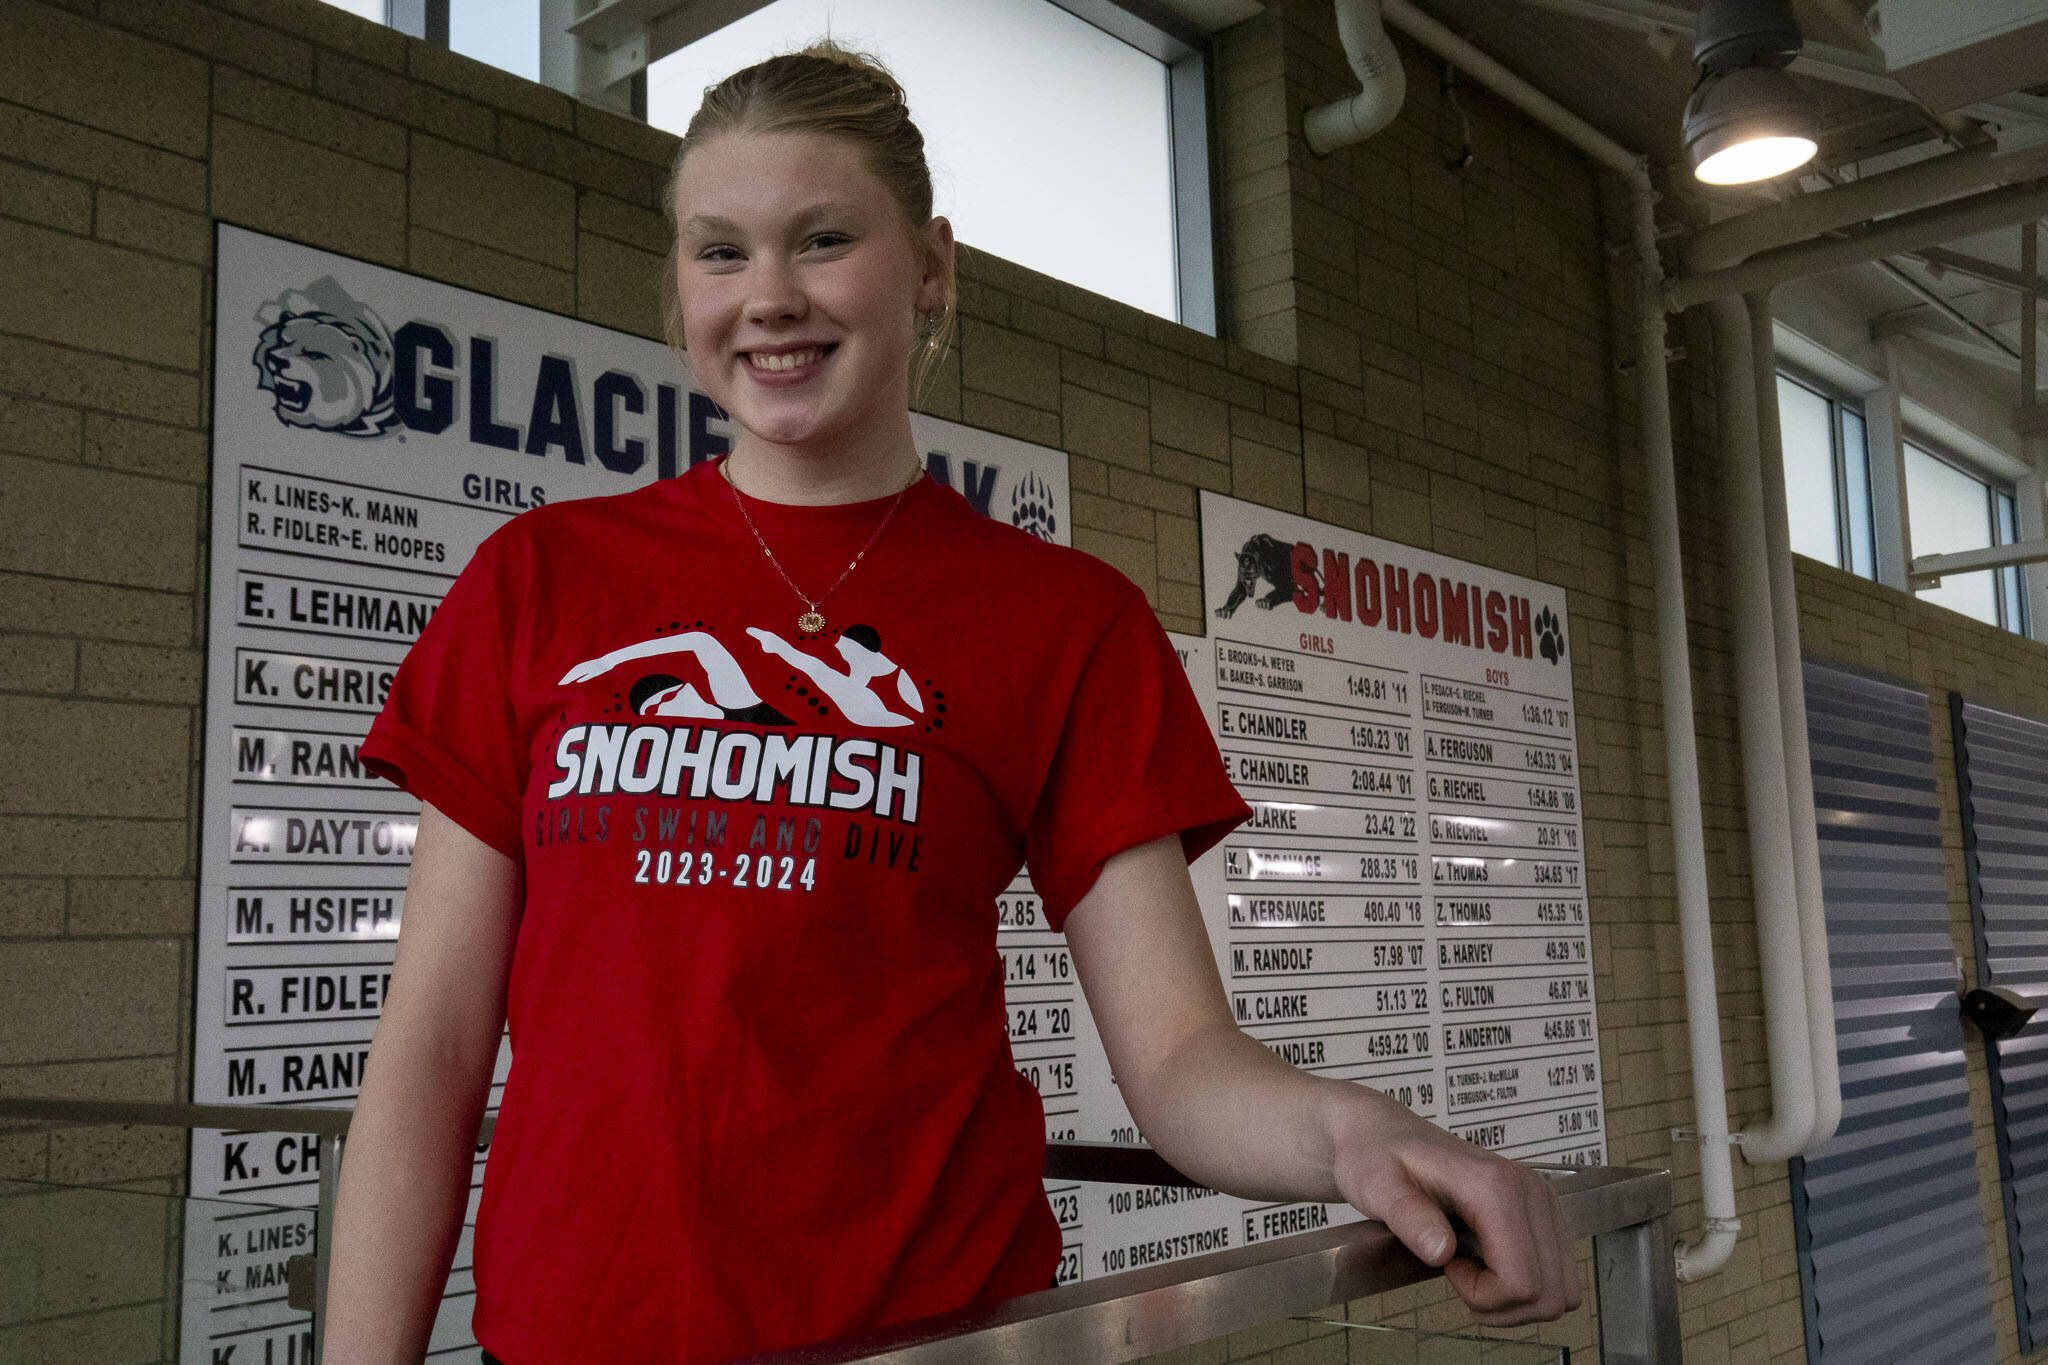 Record holder Snohomish swimmer Mary Clark poses for a photo at the Snohomish Aquatic Center in Snohomish, Washington on Monday, Oct. 23, 2023. (Annie Barker / The Herald)